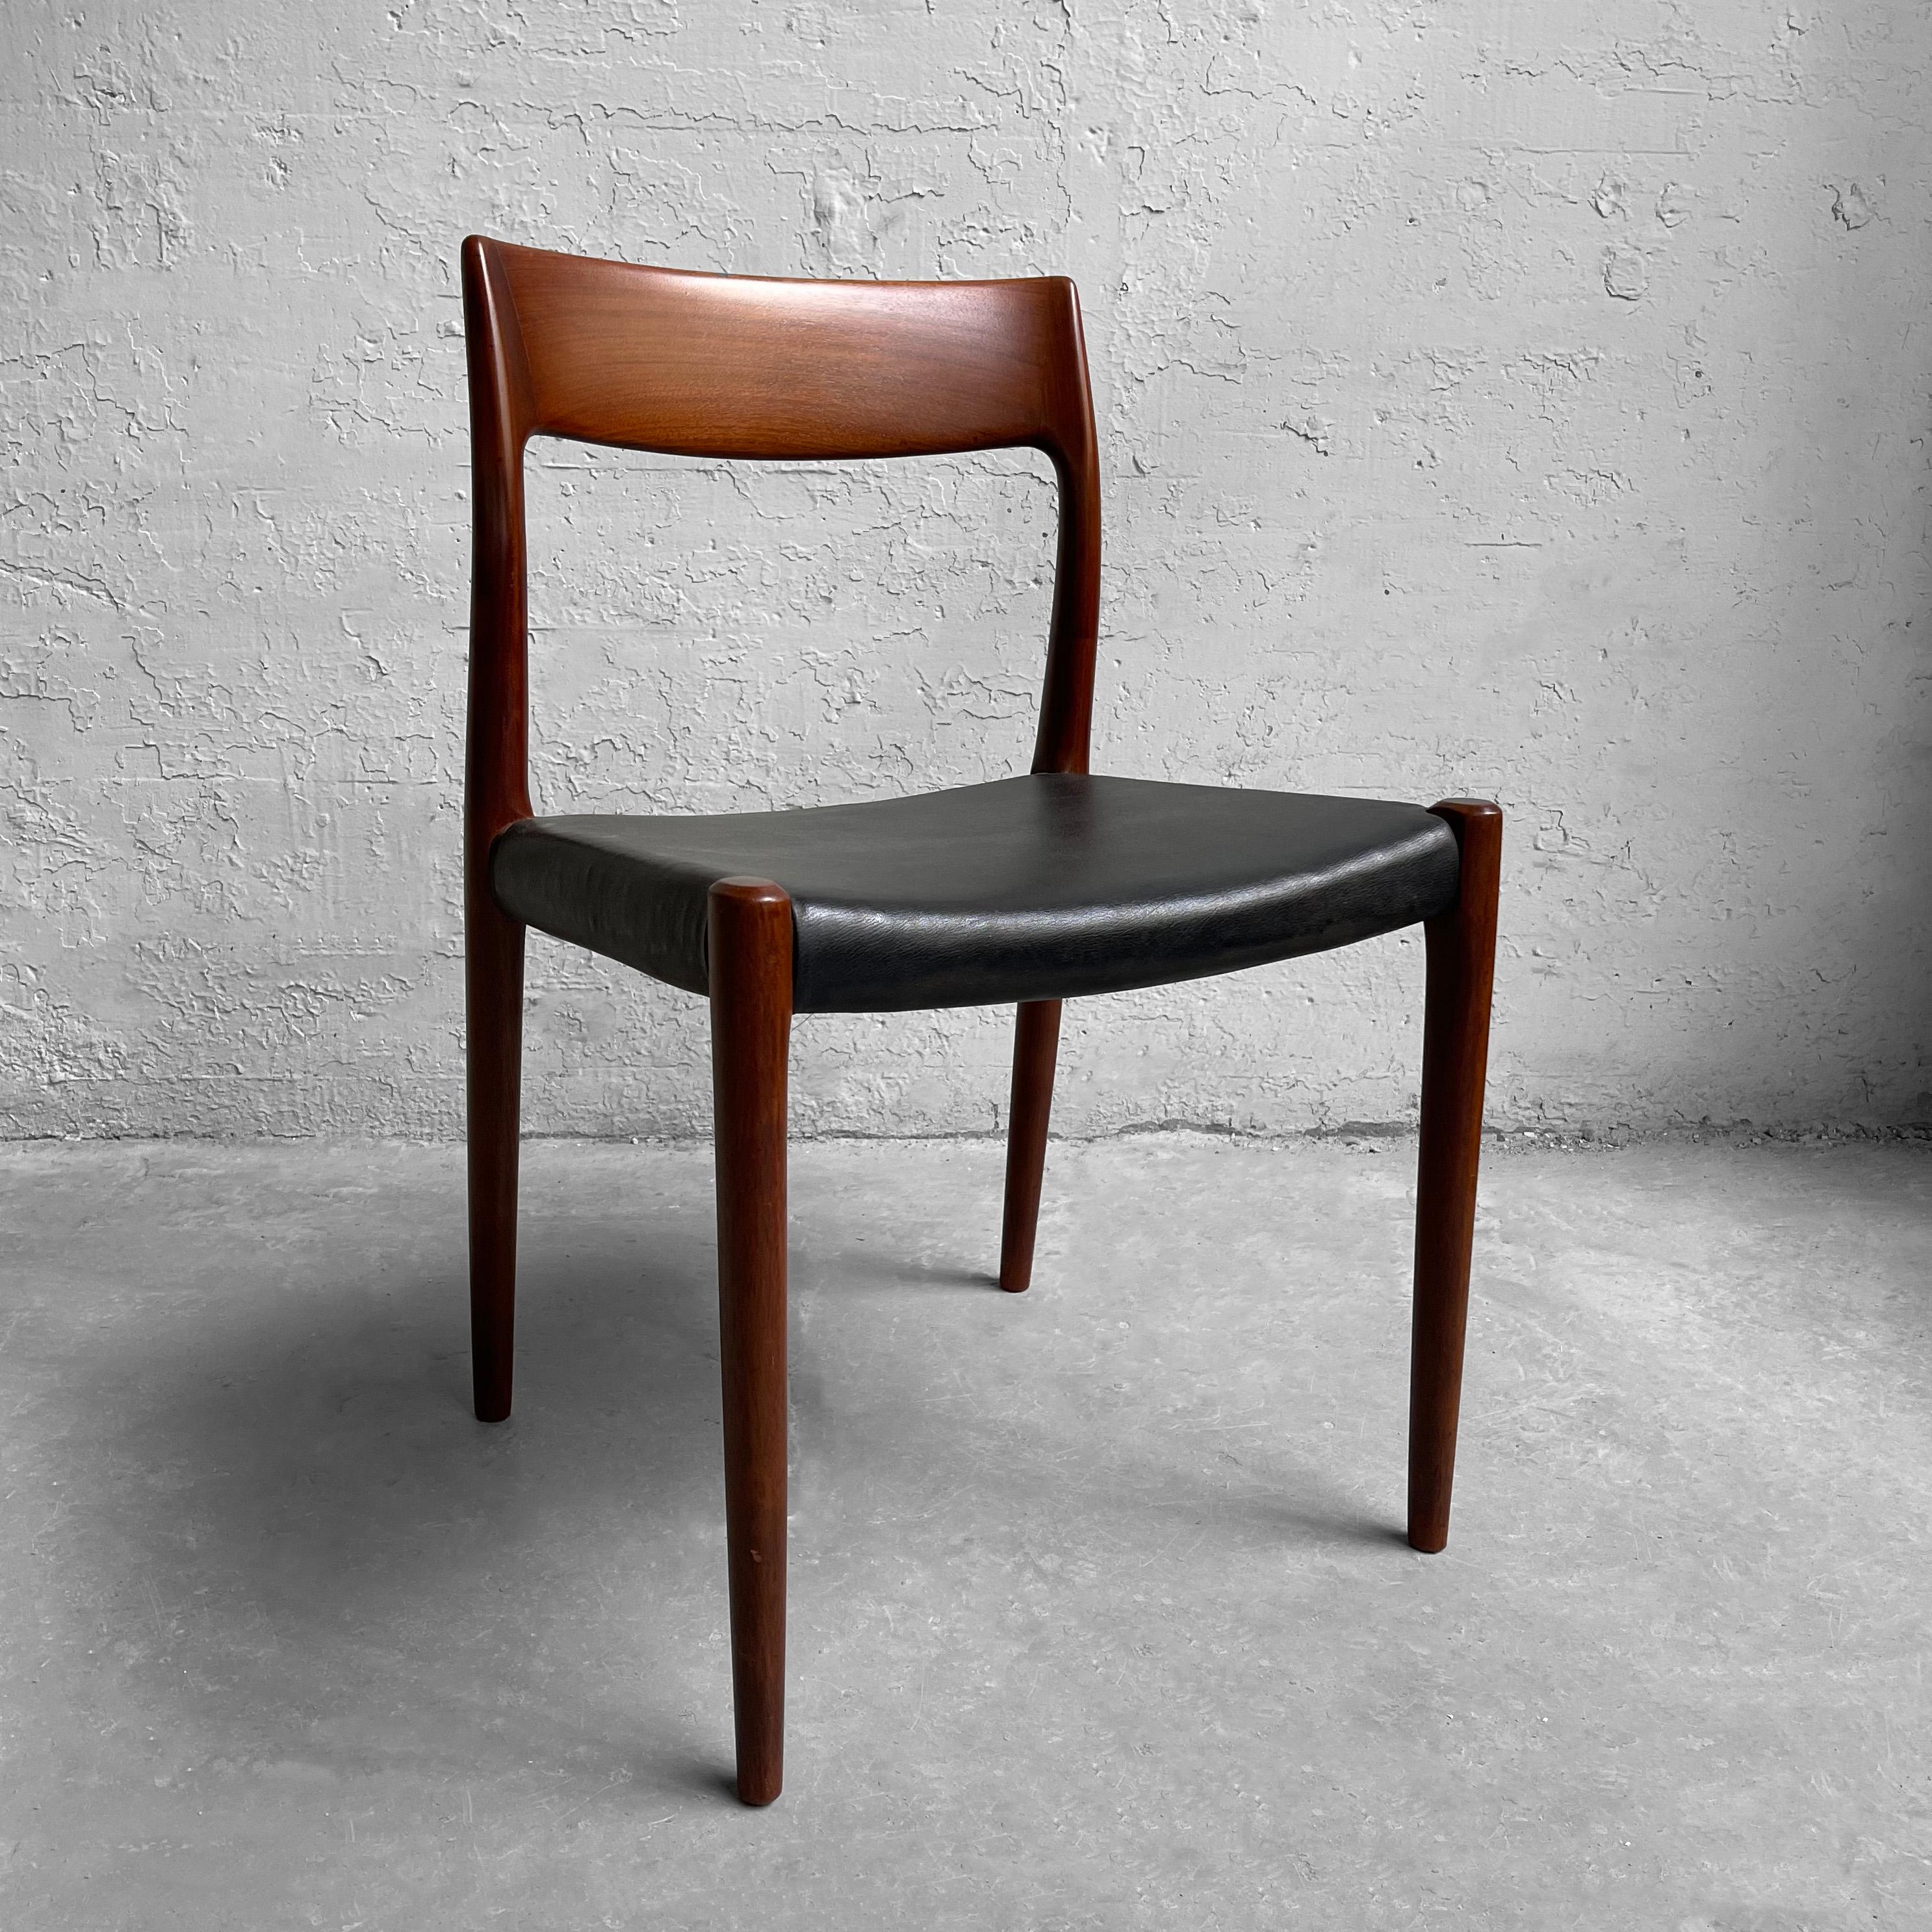 Scandinavian modern, dining or side chair by Niels Moller for J.L. Moller features a rosewood frame with black vinyl seat. This classic Danish modern chair also works as a great desk chair.